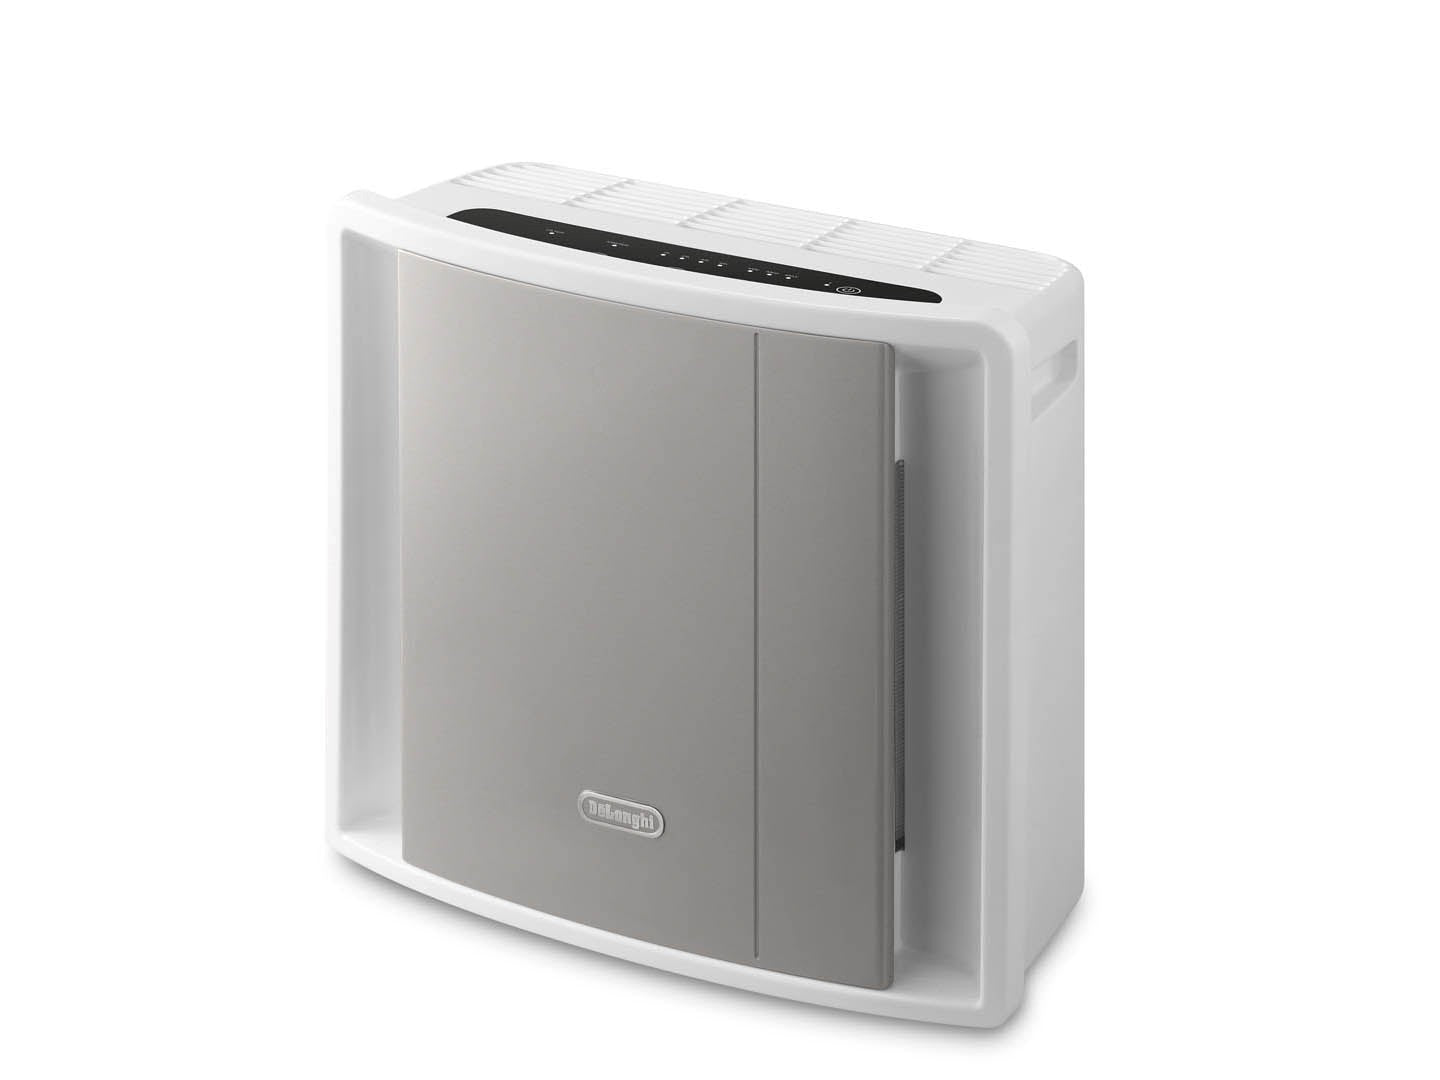 Image of a De'Longhi Air Purifier on a white background